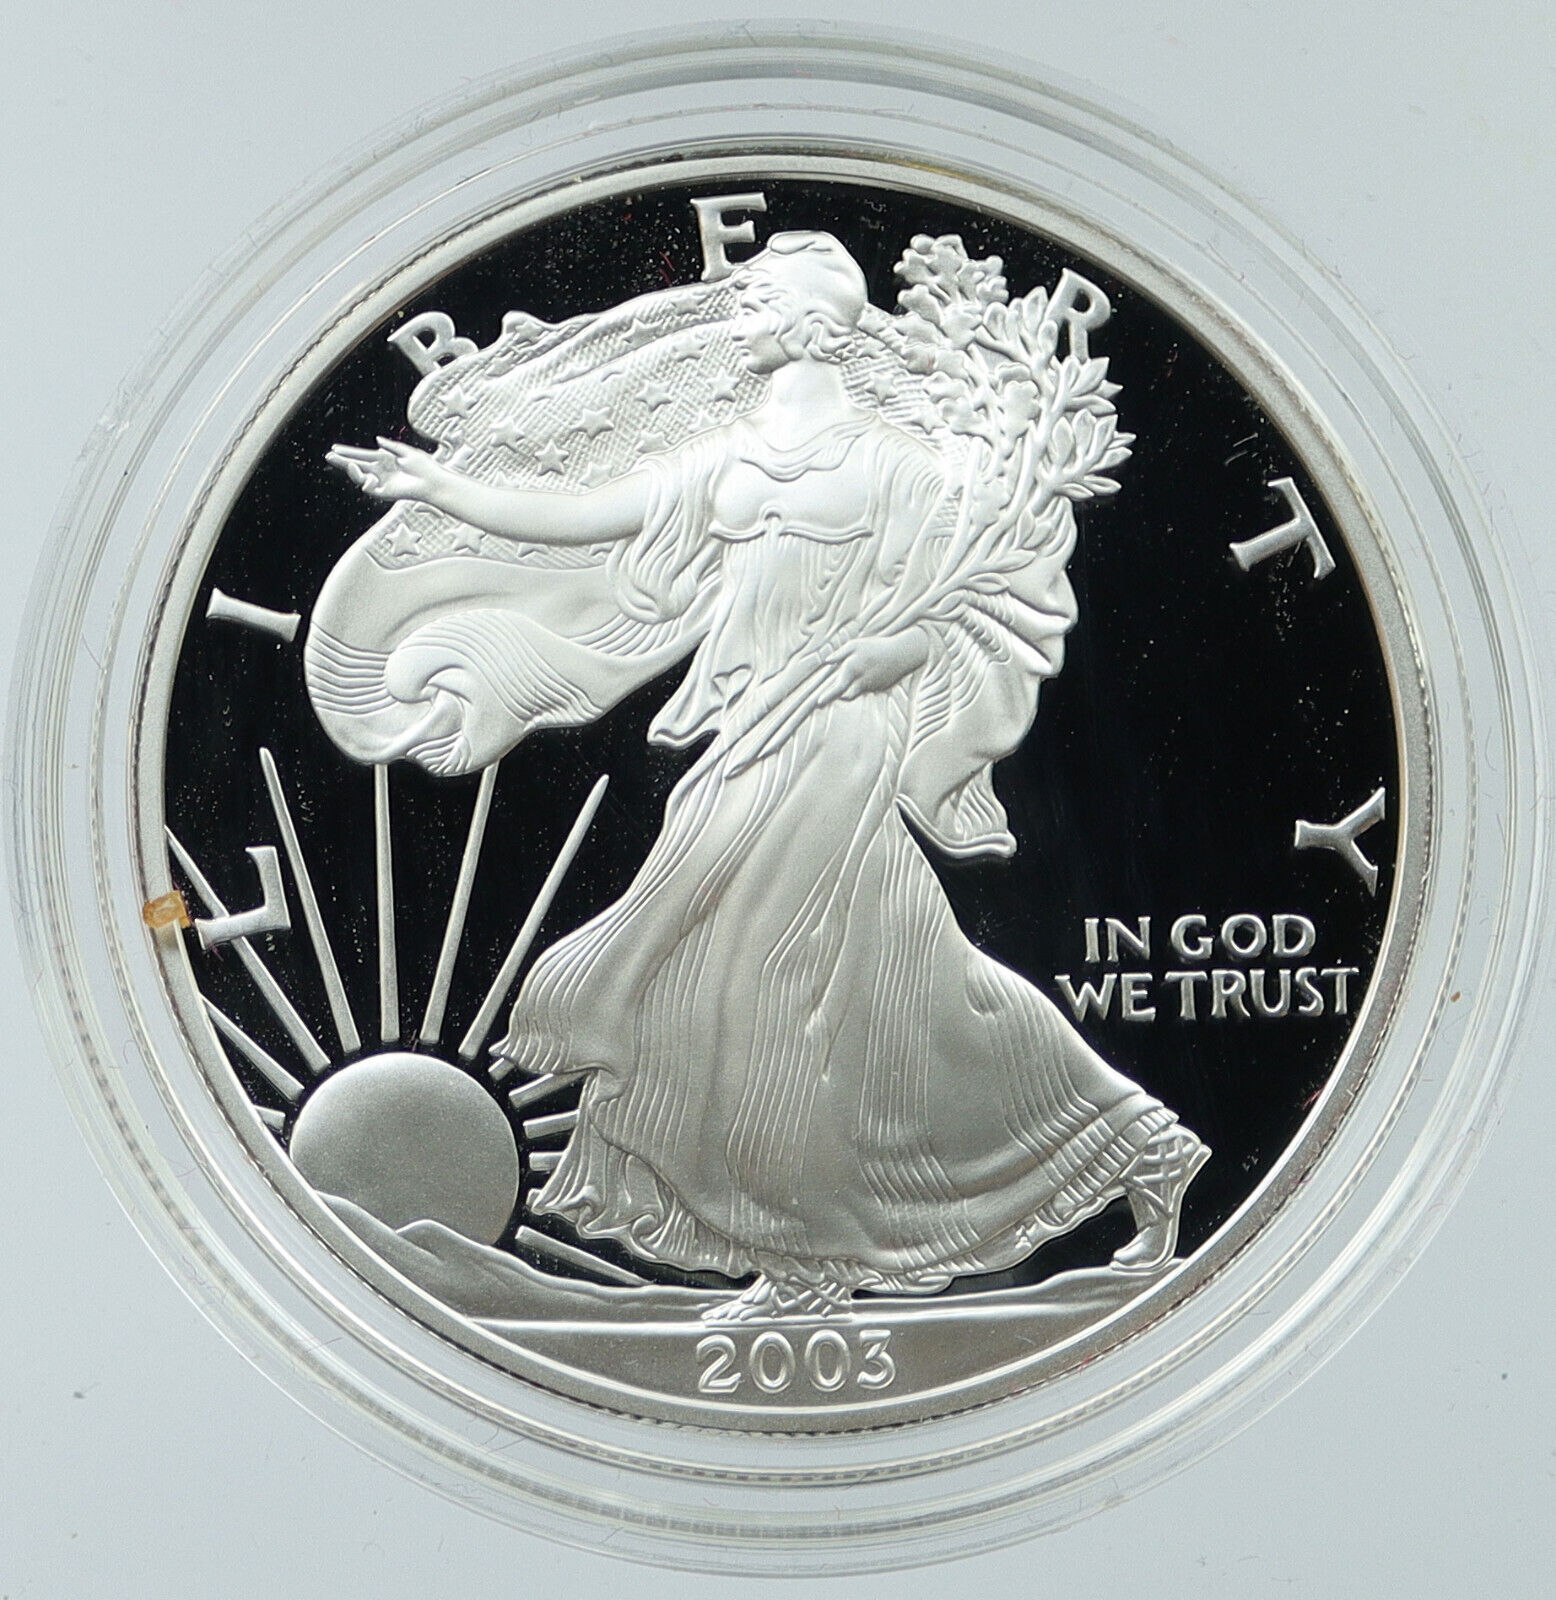 2003 UNITED STATES USA American Eagle & Liberty PROOF SILVER Dollar Coin i117785